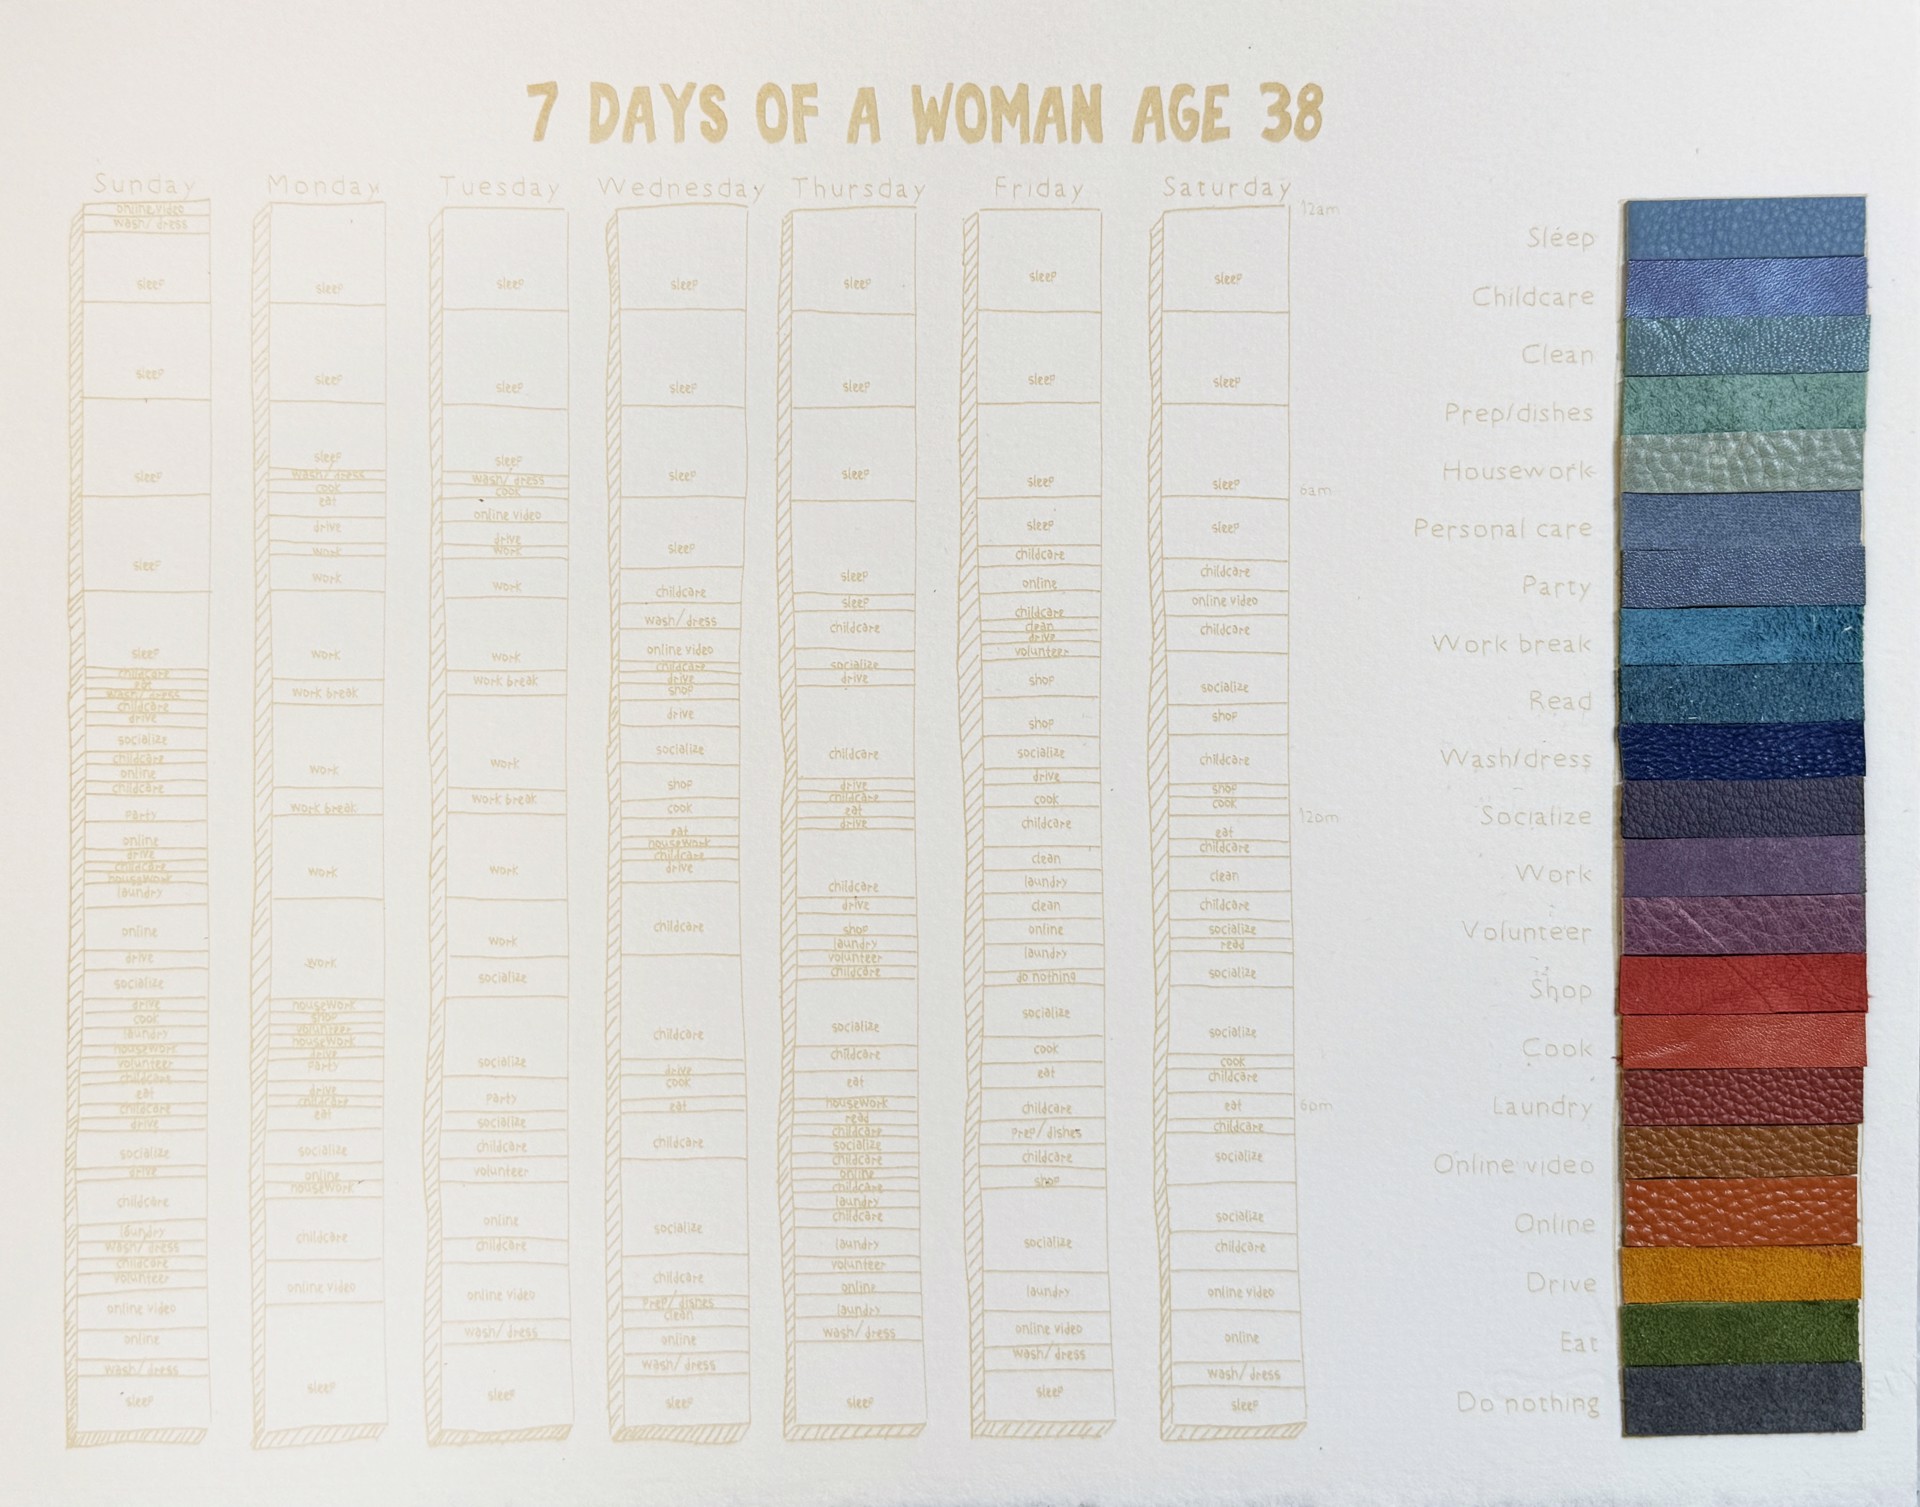 7 Days a Woman Age 38 by Laurie Frick